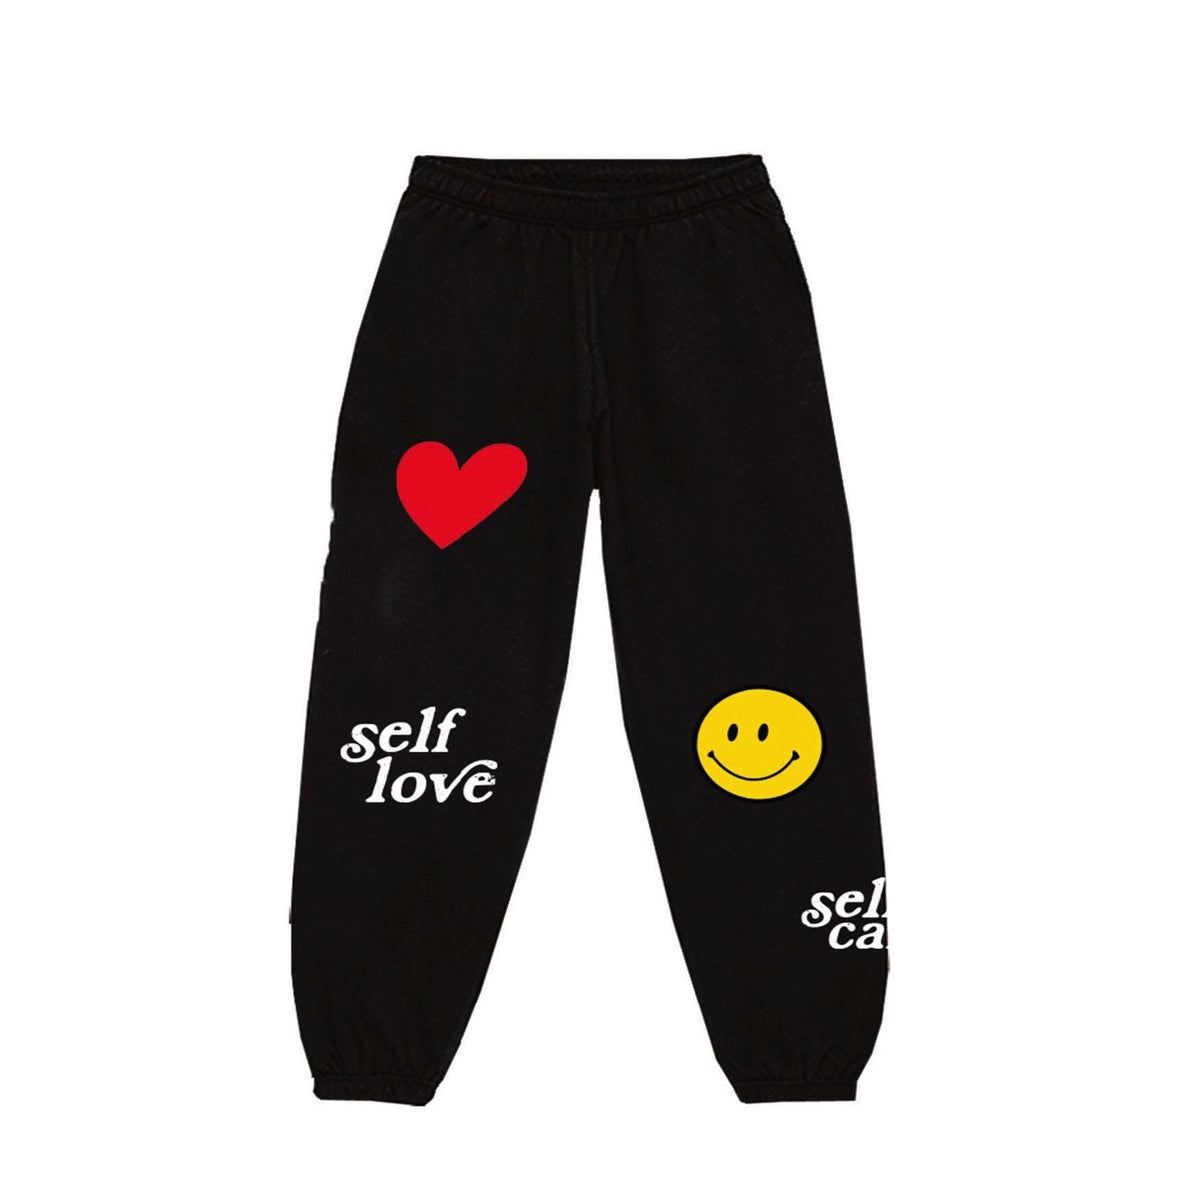 SELF LOVE JOGGERS - BLACK JOGGERS Yours Truly Clothing 